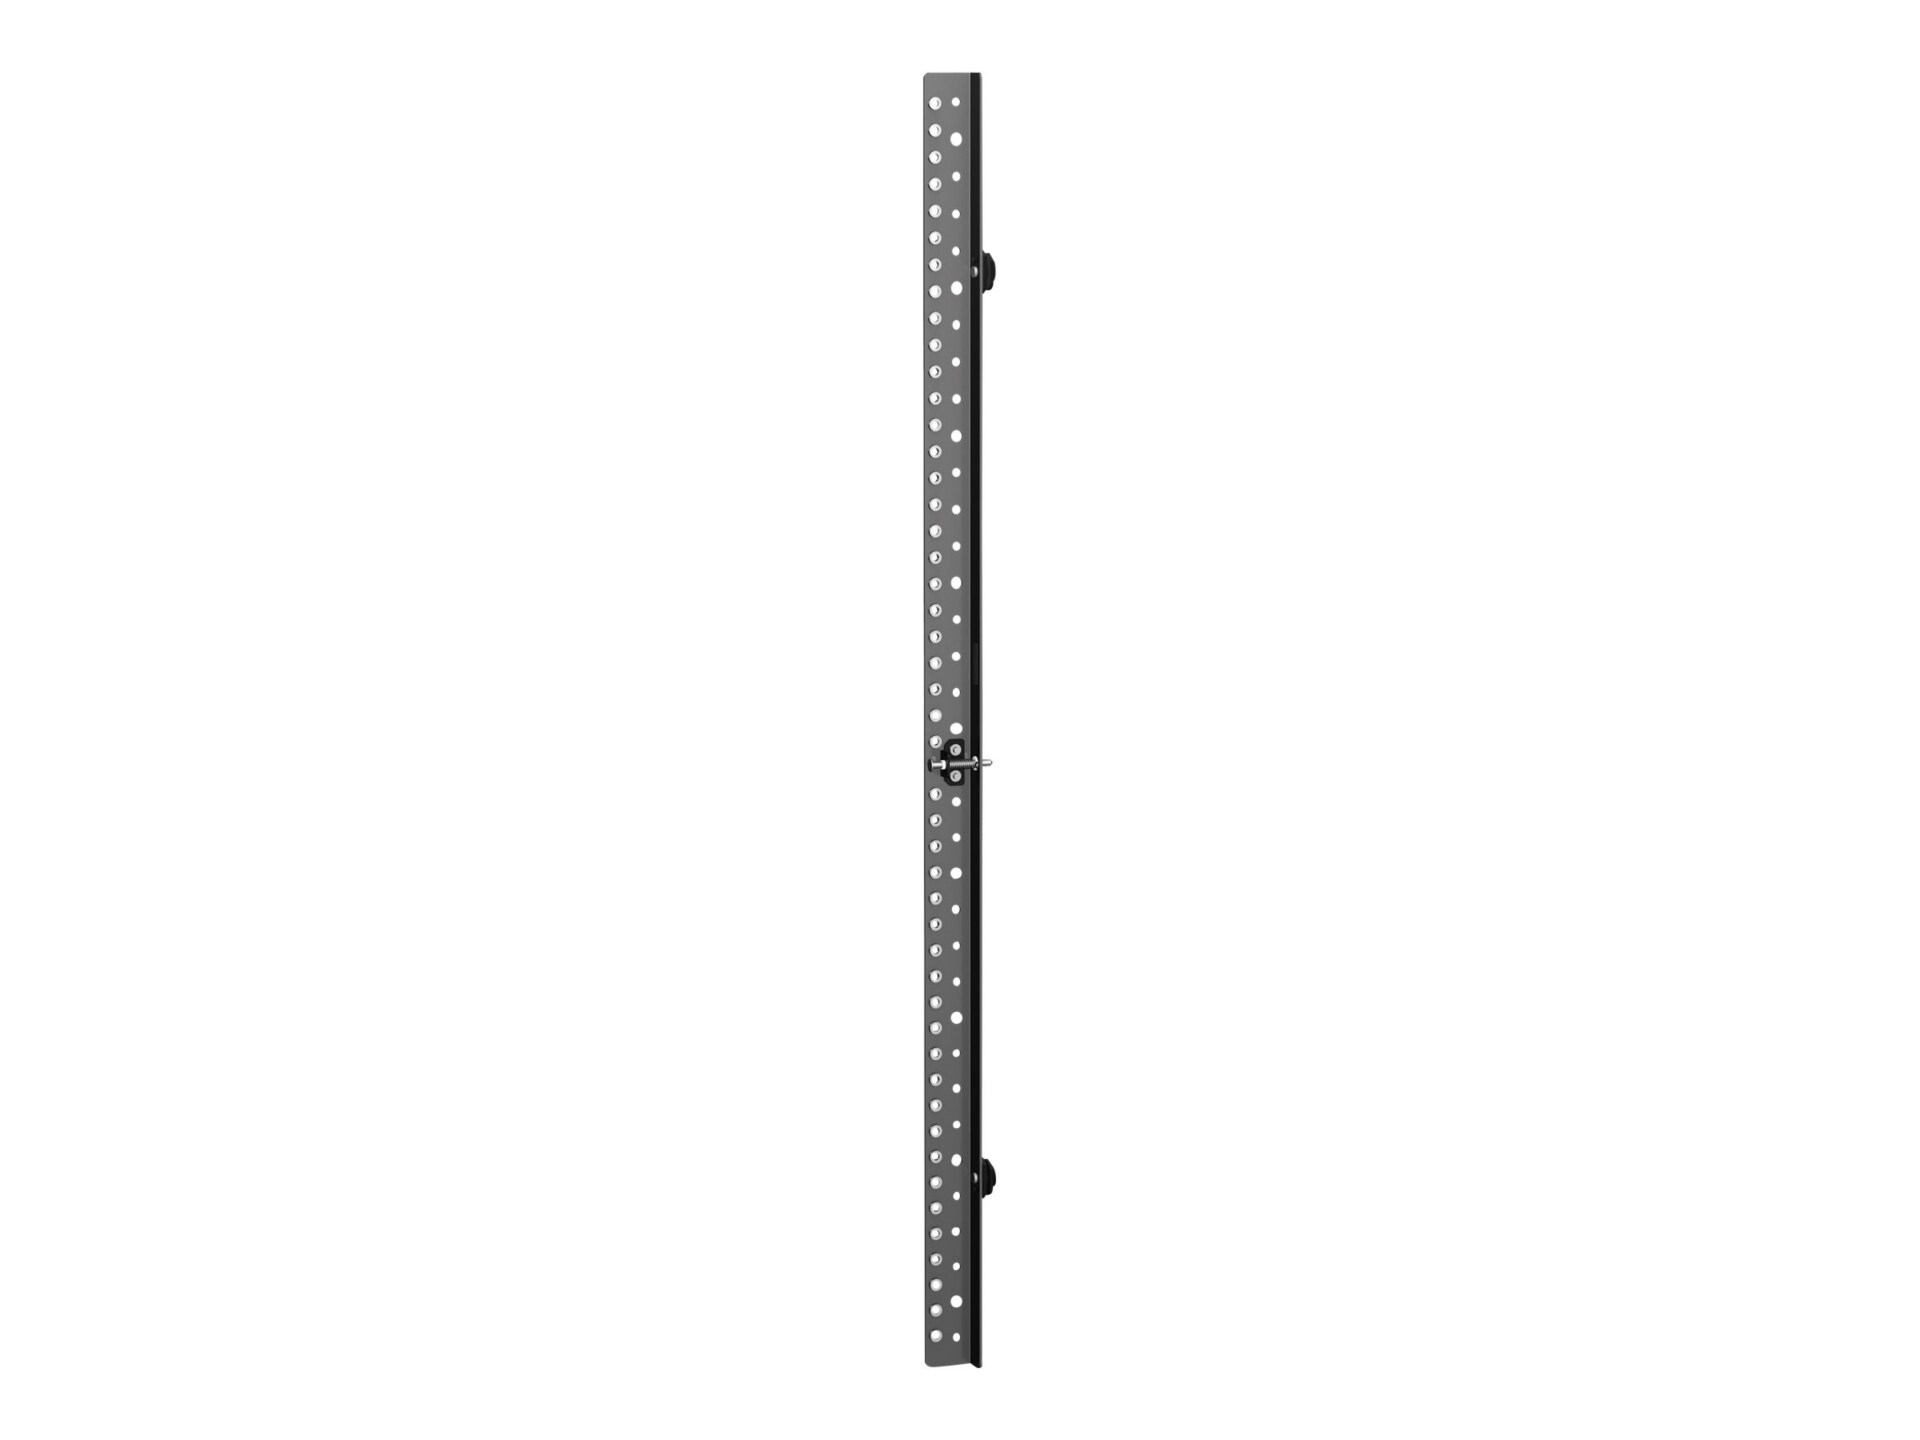 APC by Schneider Electric AR8395 Mounting Bar for Enclosure - Silver